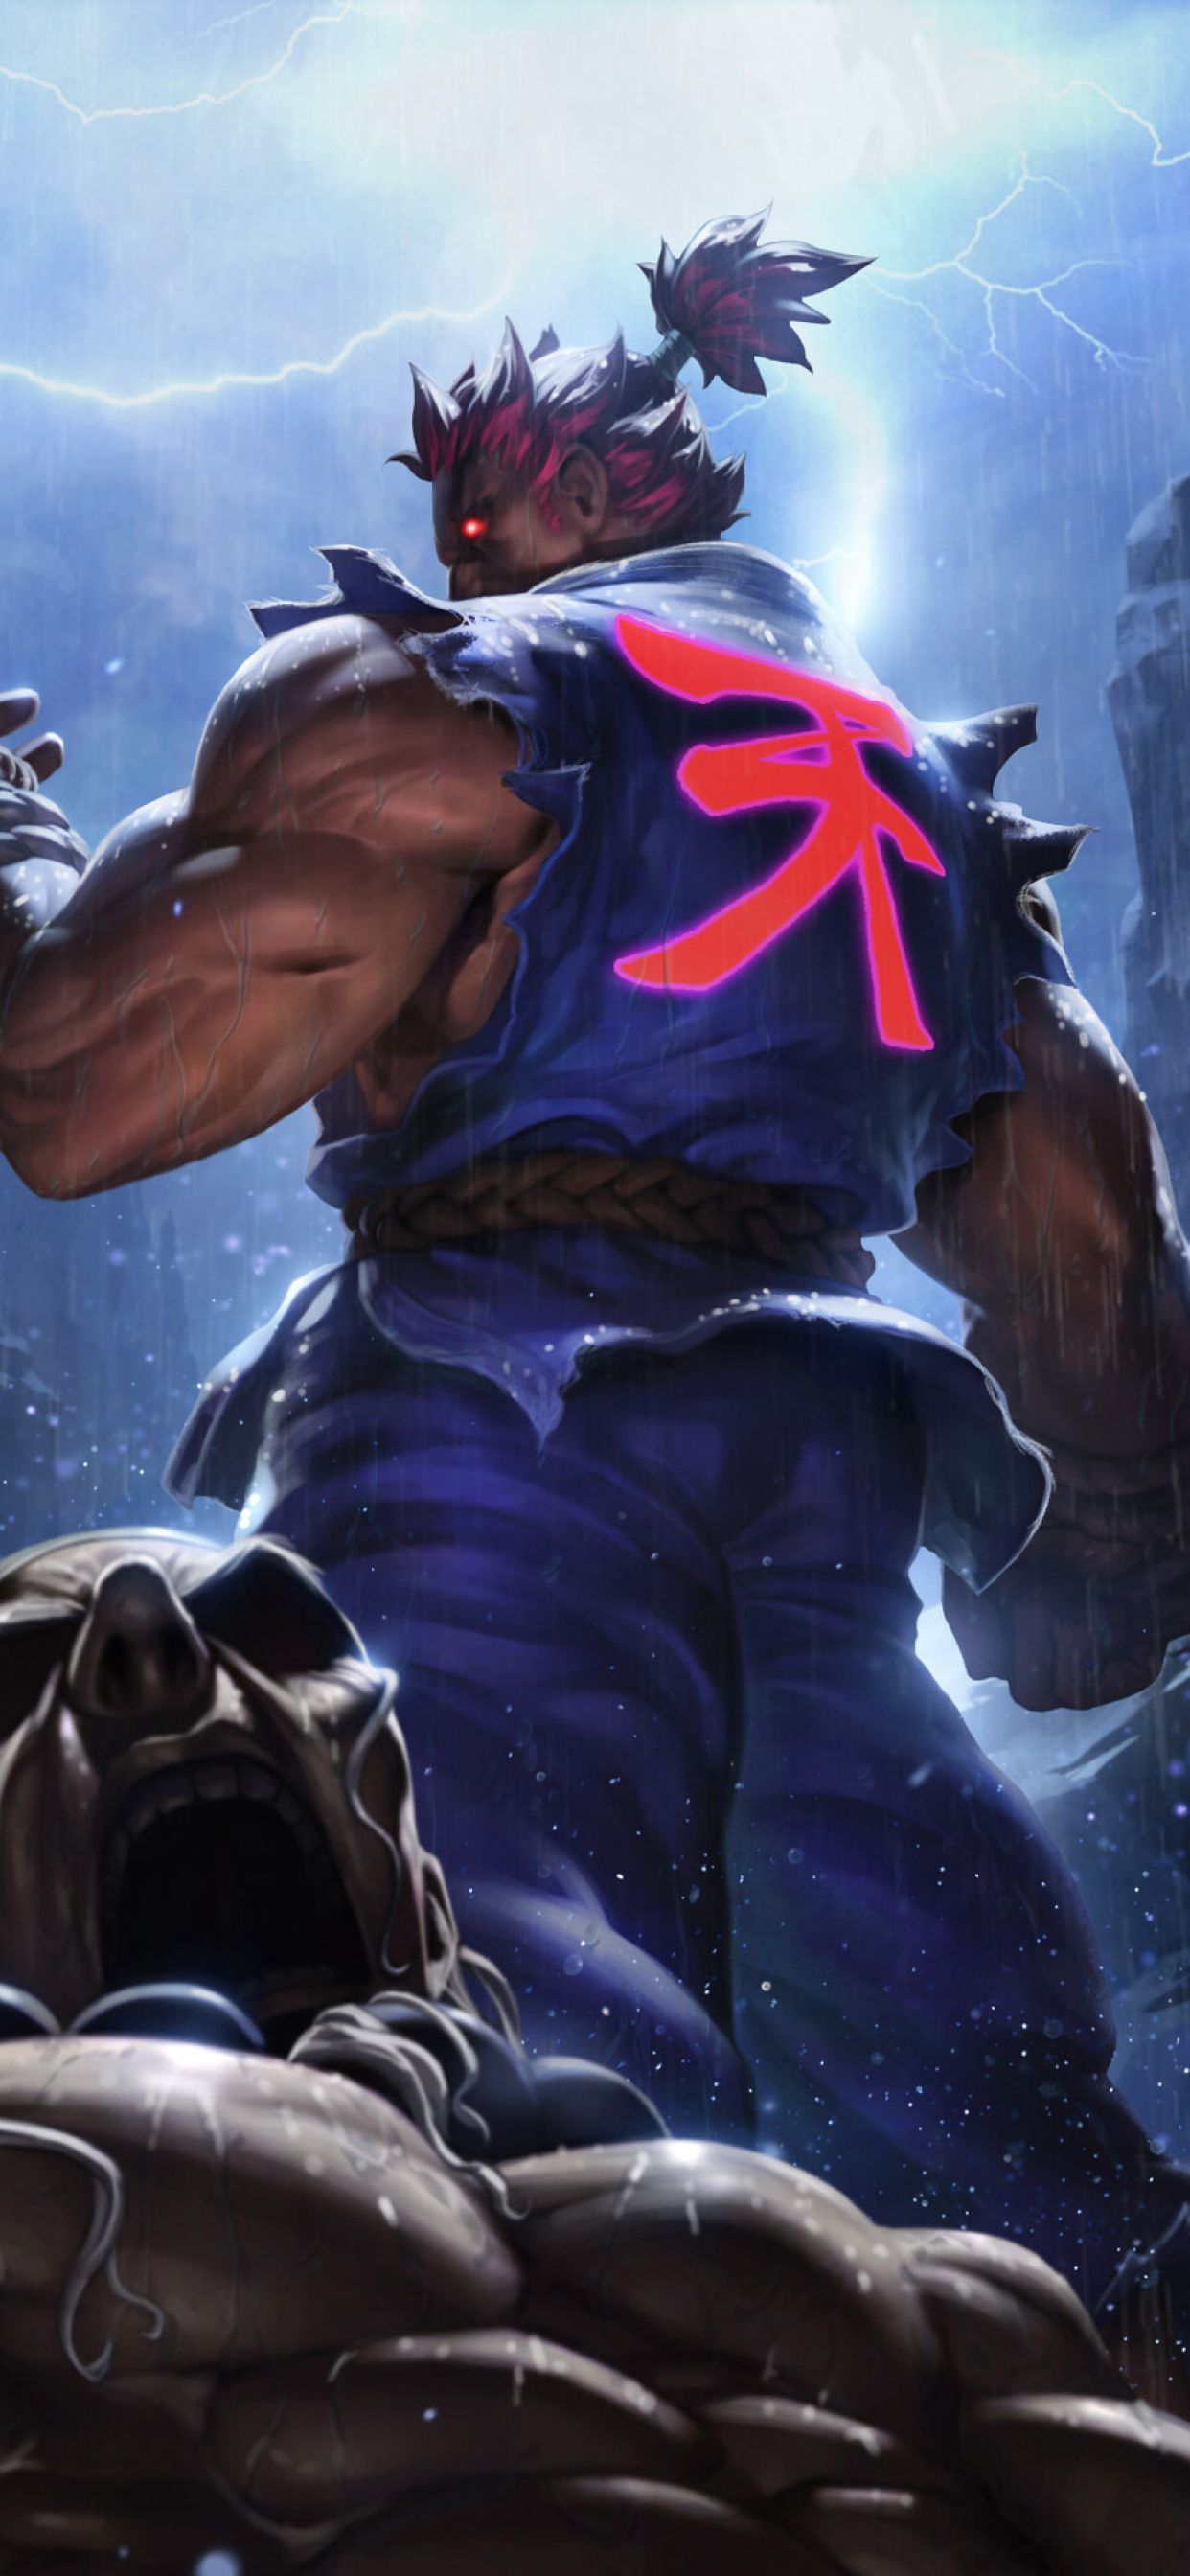 1242x26 Akuma Street Fighter Game Iphone Xs Max Wallpaper Hd Games 4k Wallpapers Images Photos And Background Wallpapers Den